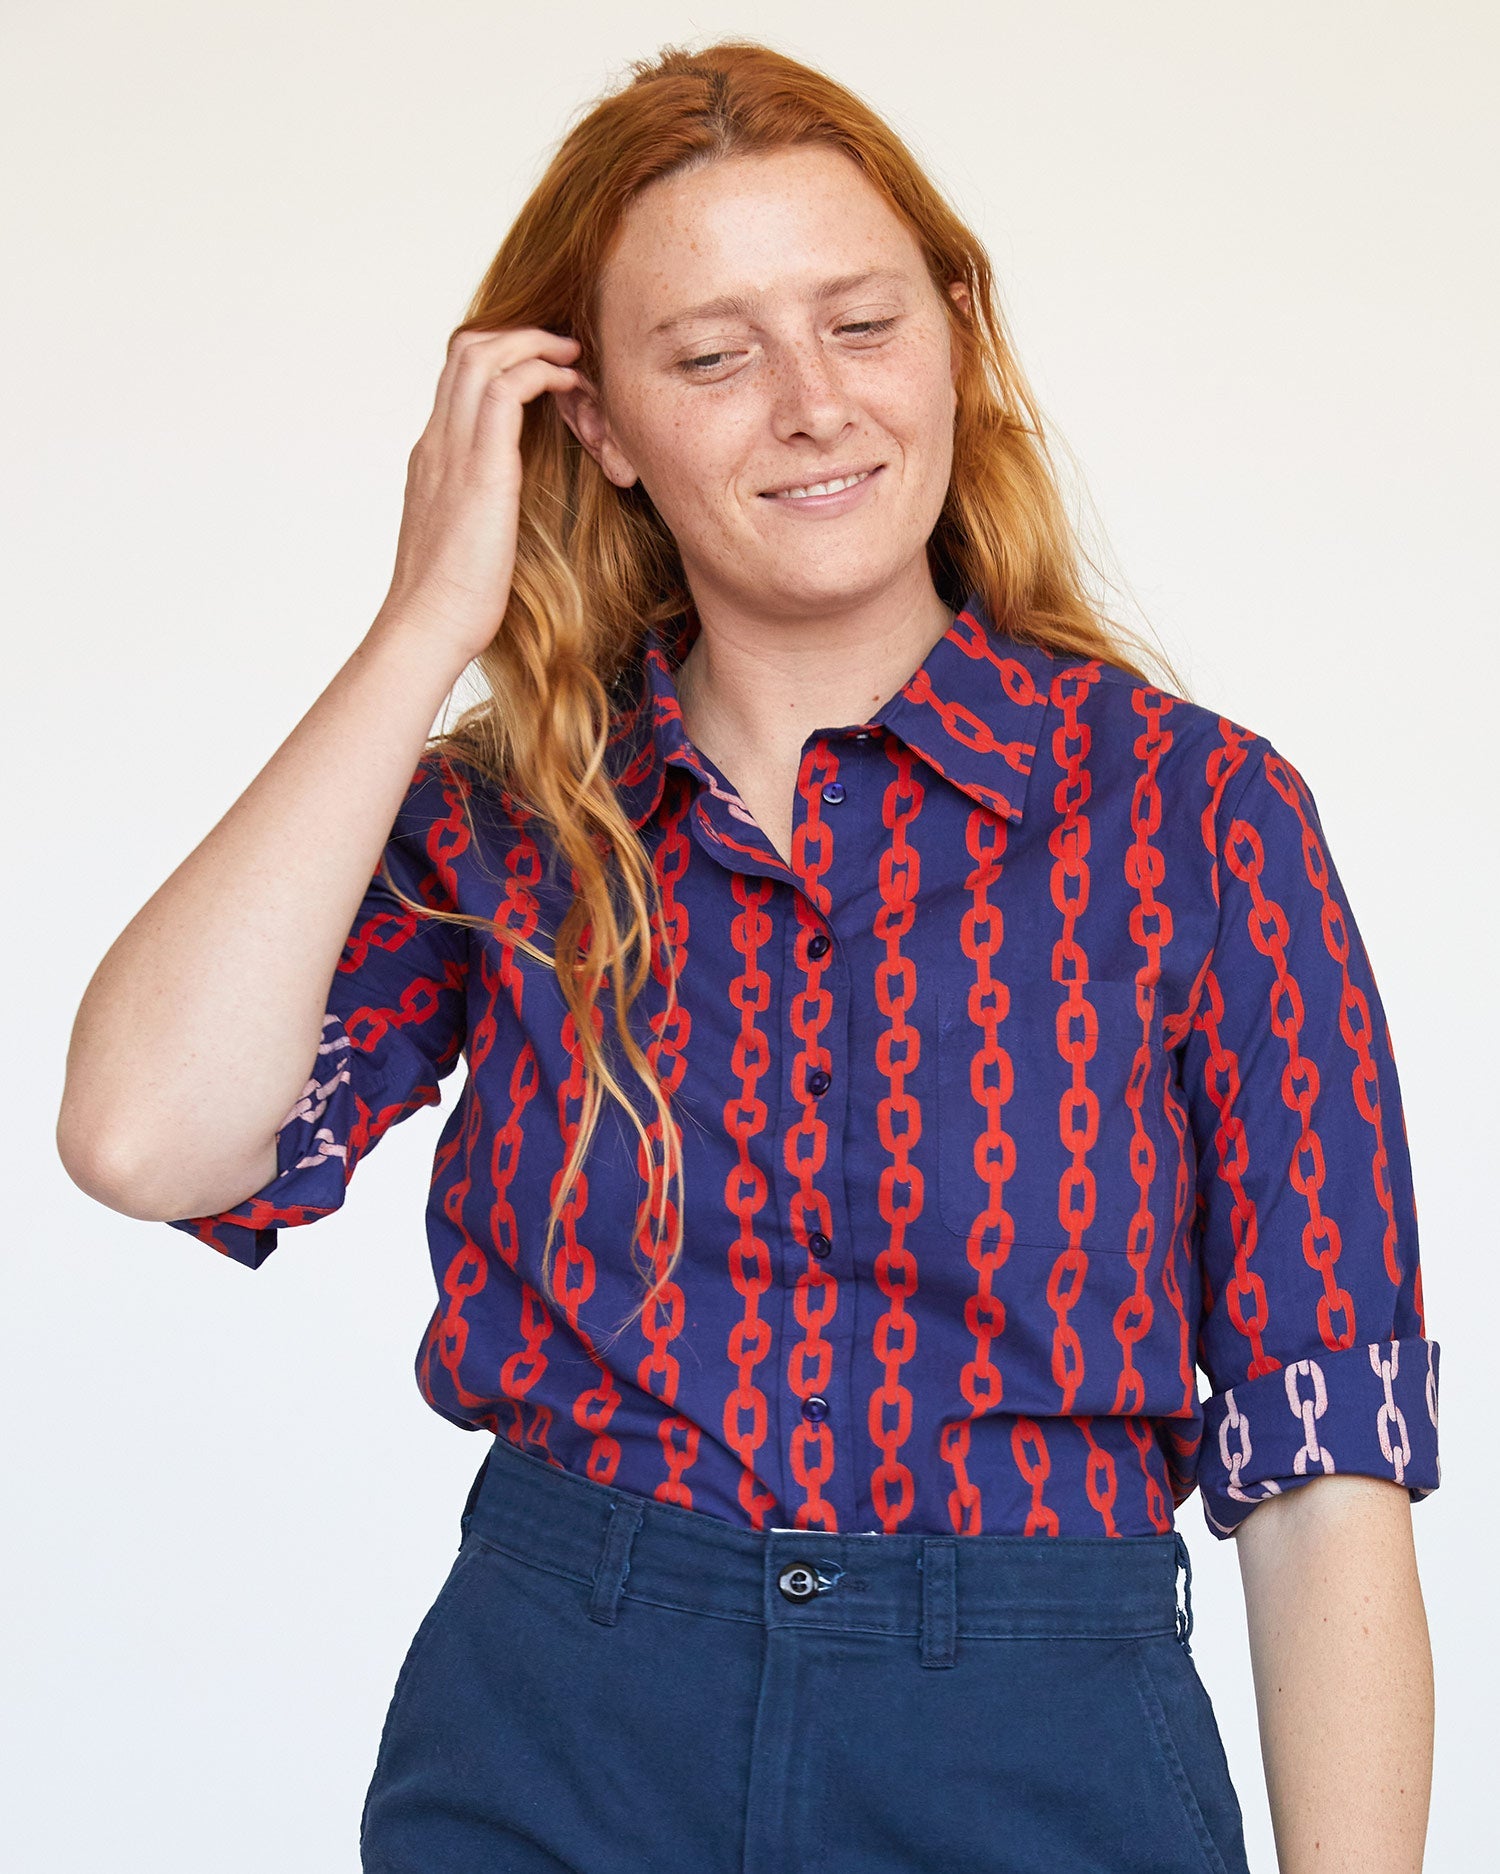 Courtney wearing the Natalie wearing the Navy and Poppy Chains Felix Blouse tucked in to blue slacks, tucking her hair behind her ear